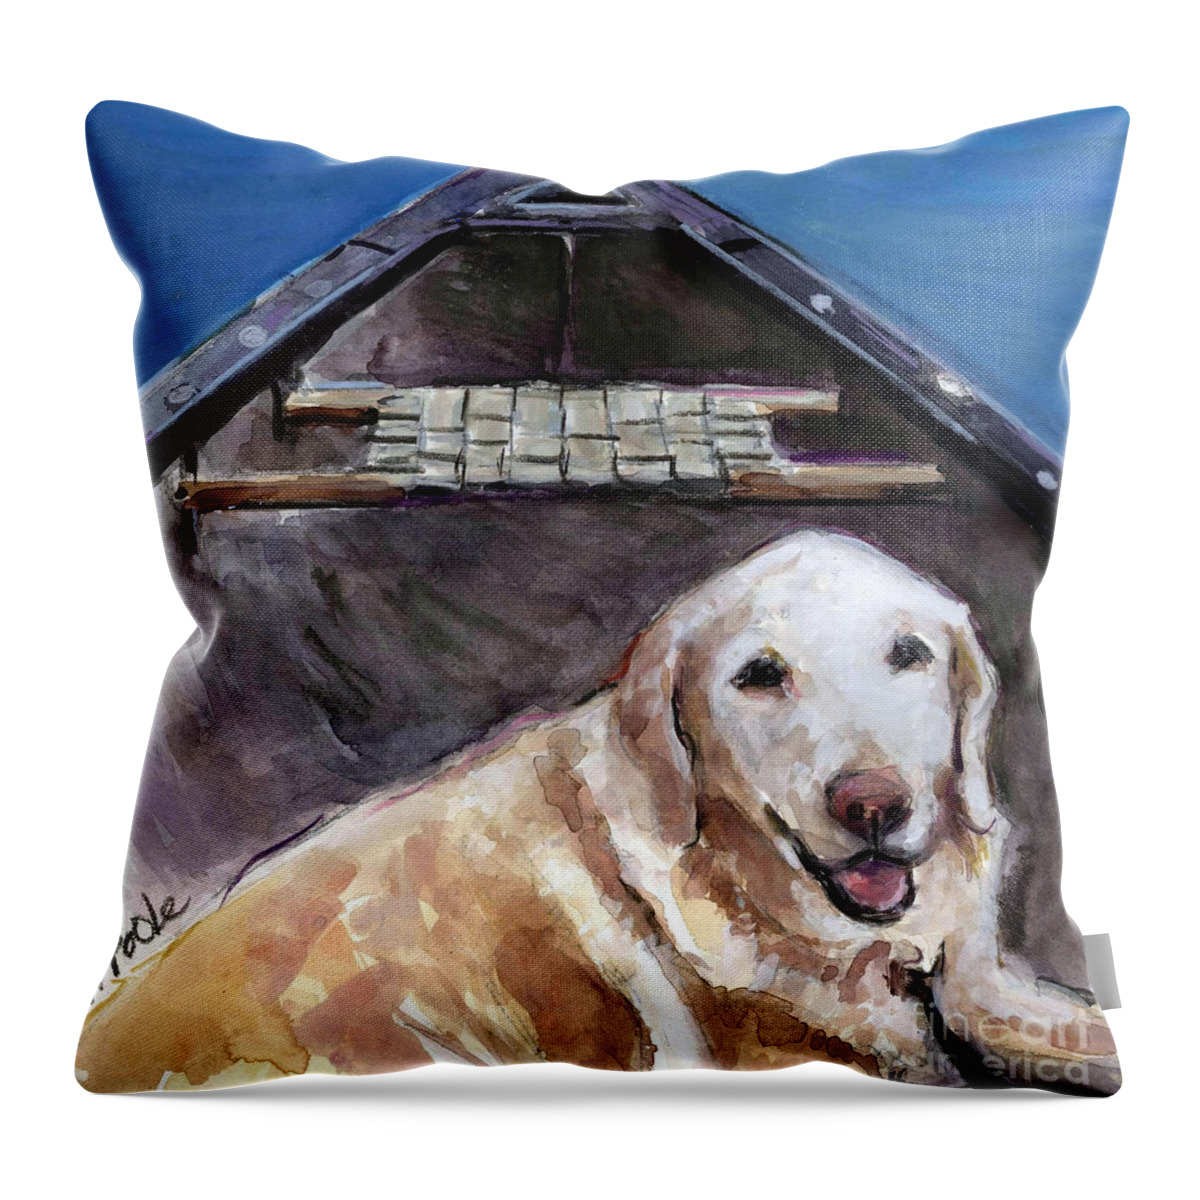 Dog In Canoe Throw Pillow featuring the painting Me You Canoe by Molly Poole